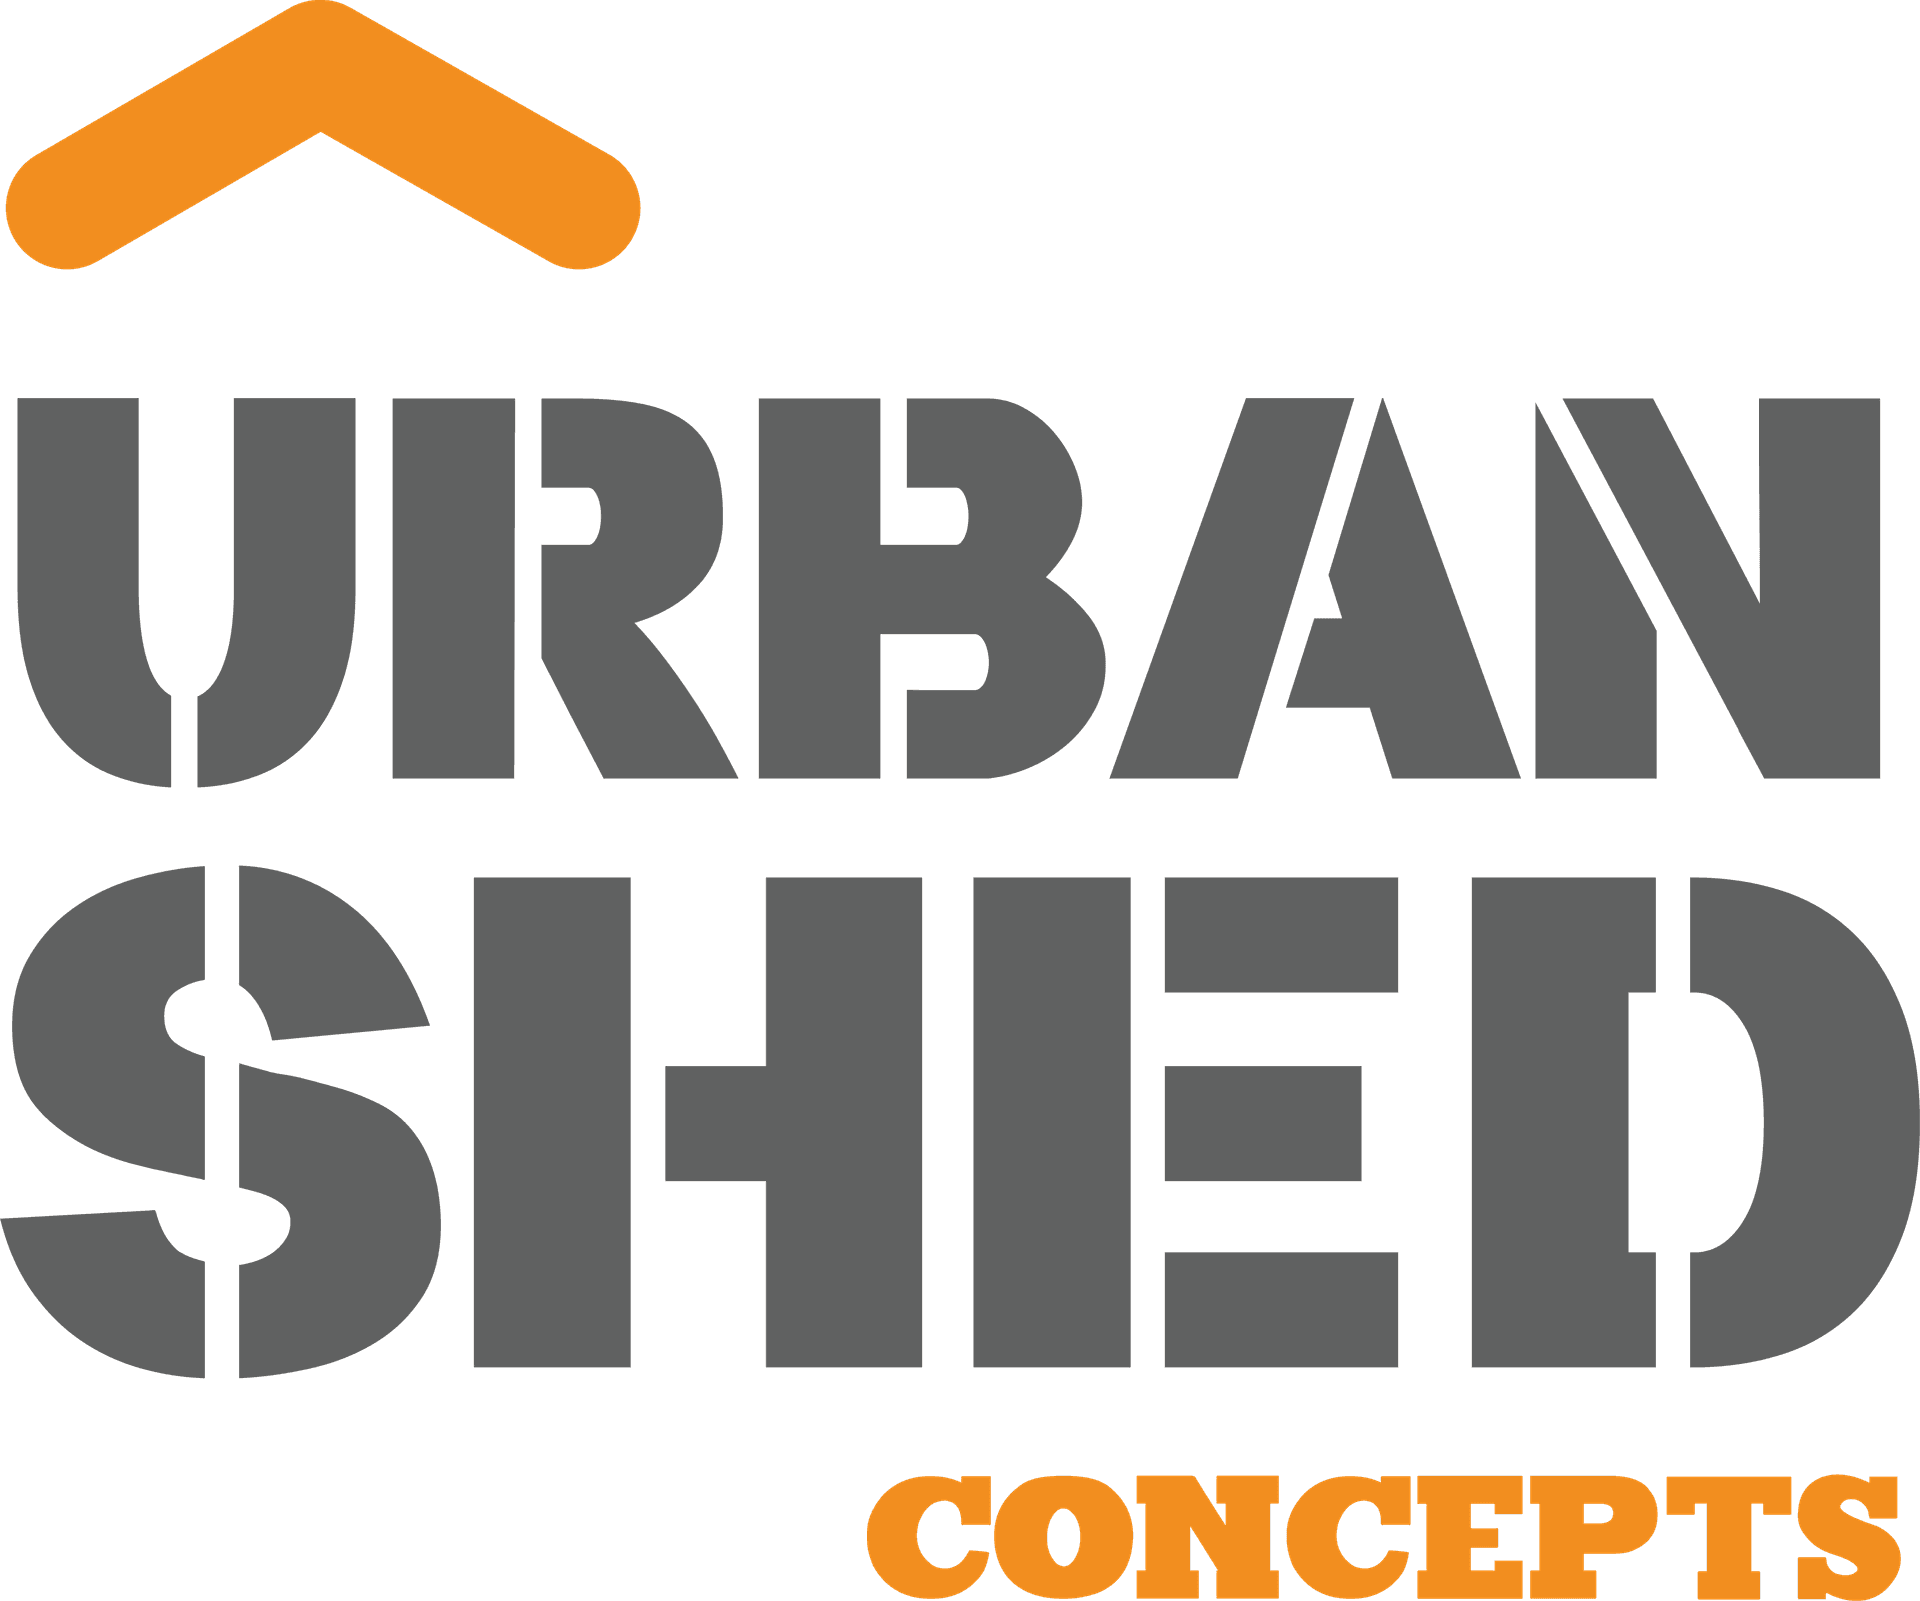 Urban Shed Concepts